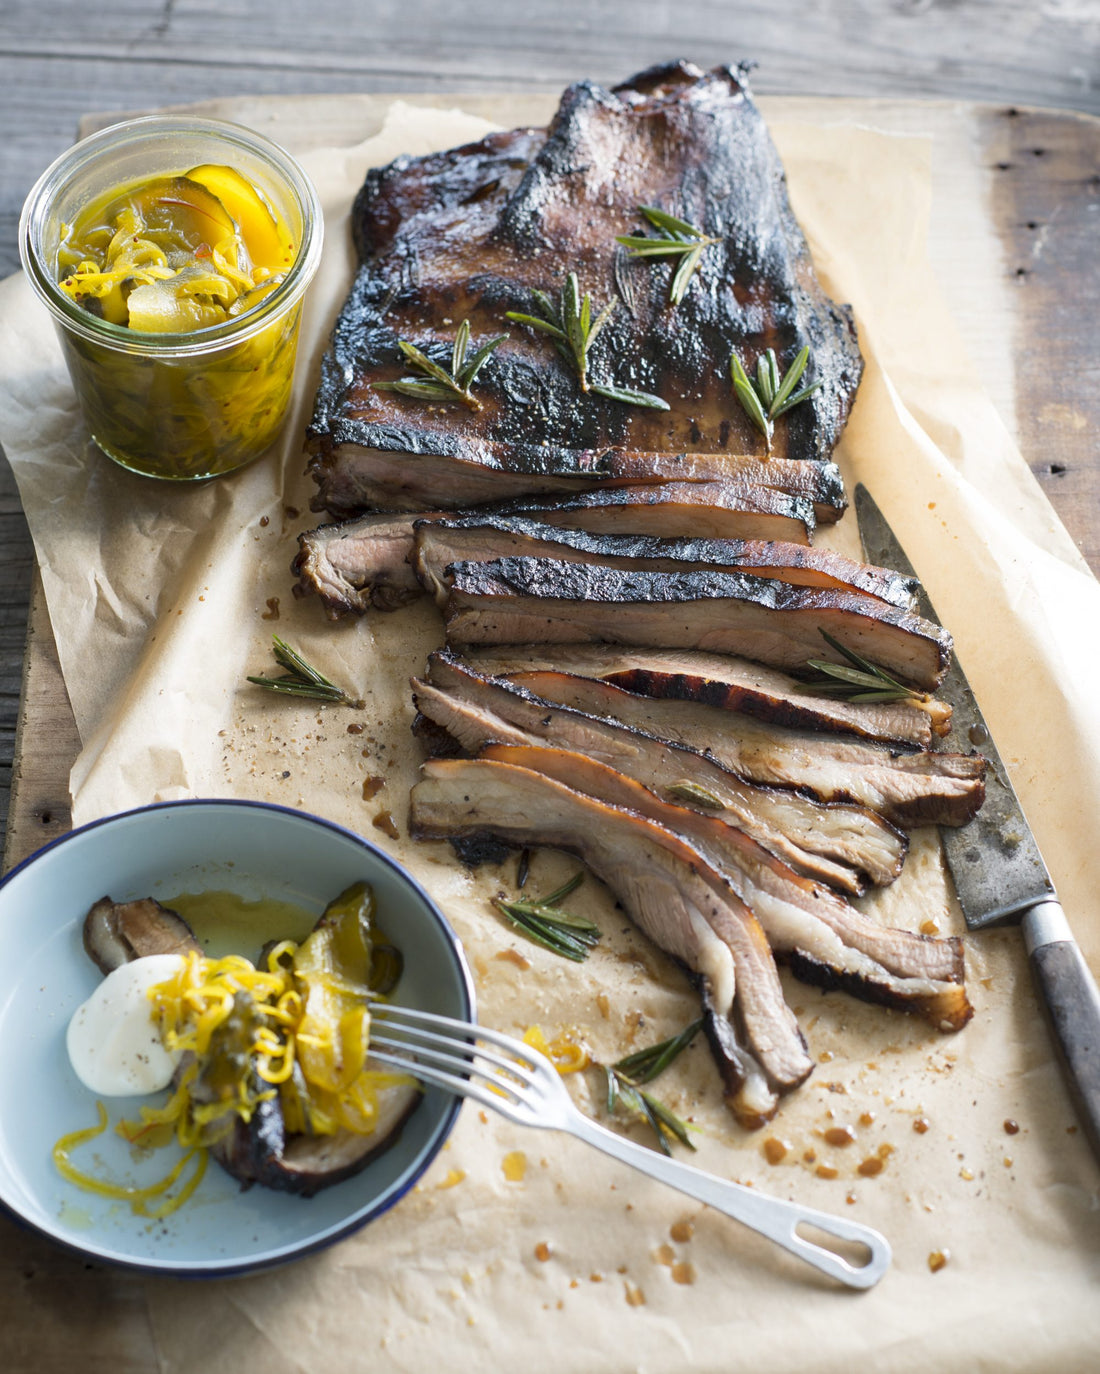 Recipe: Grilled marinated lamb skirt with bread and butter pickles